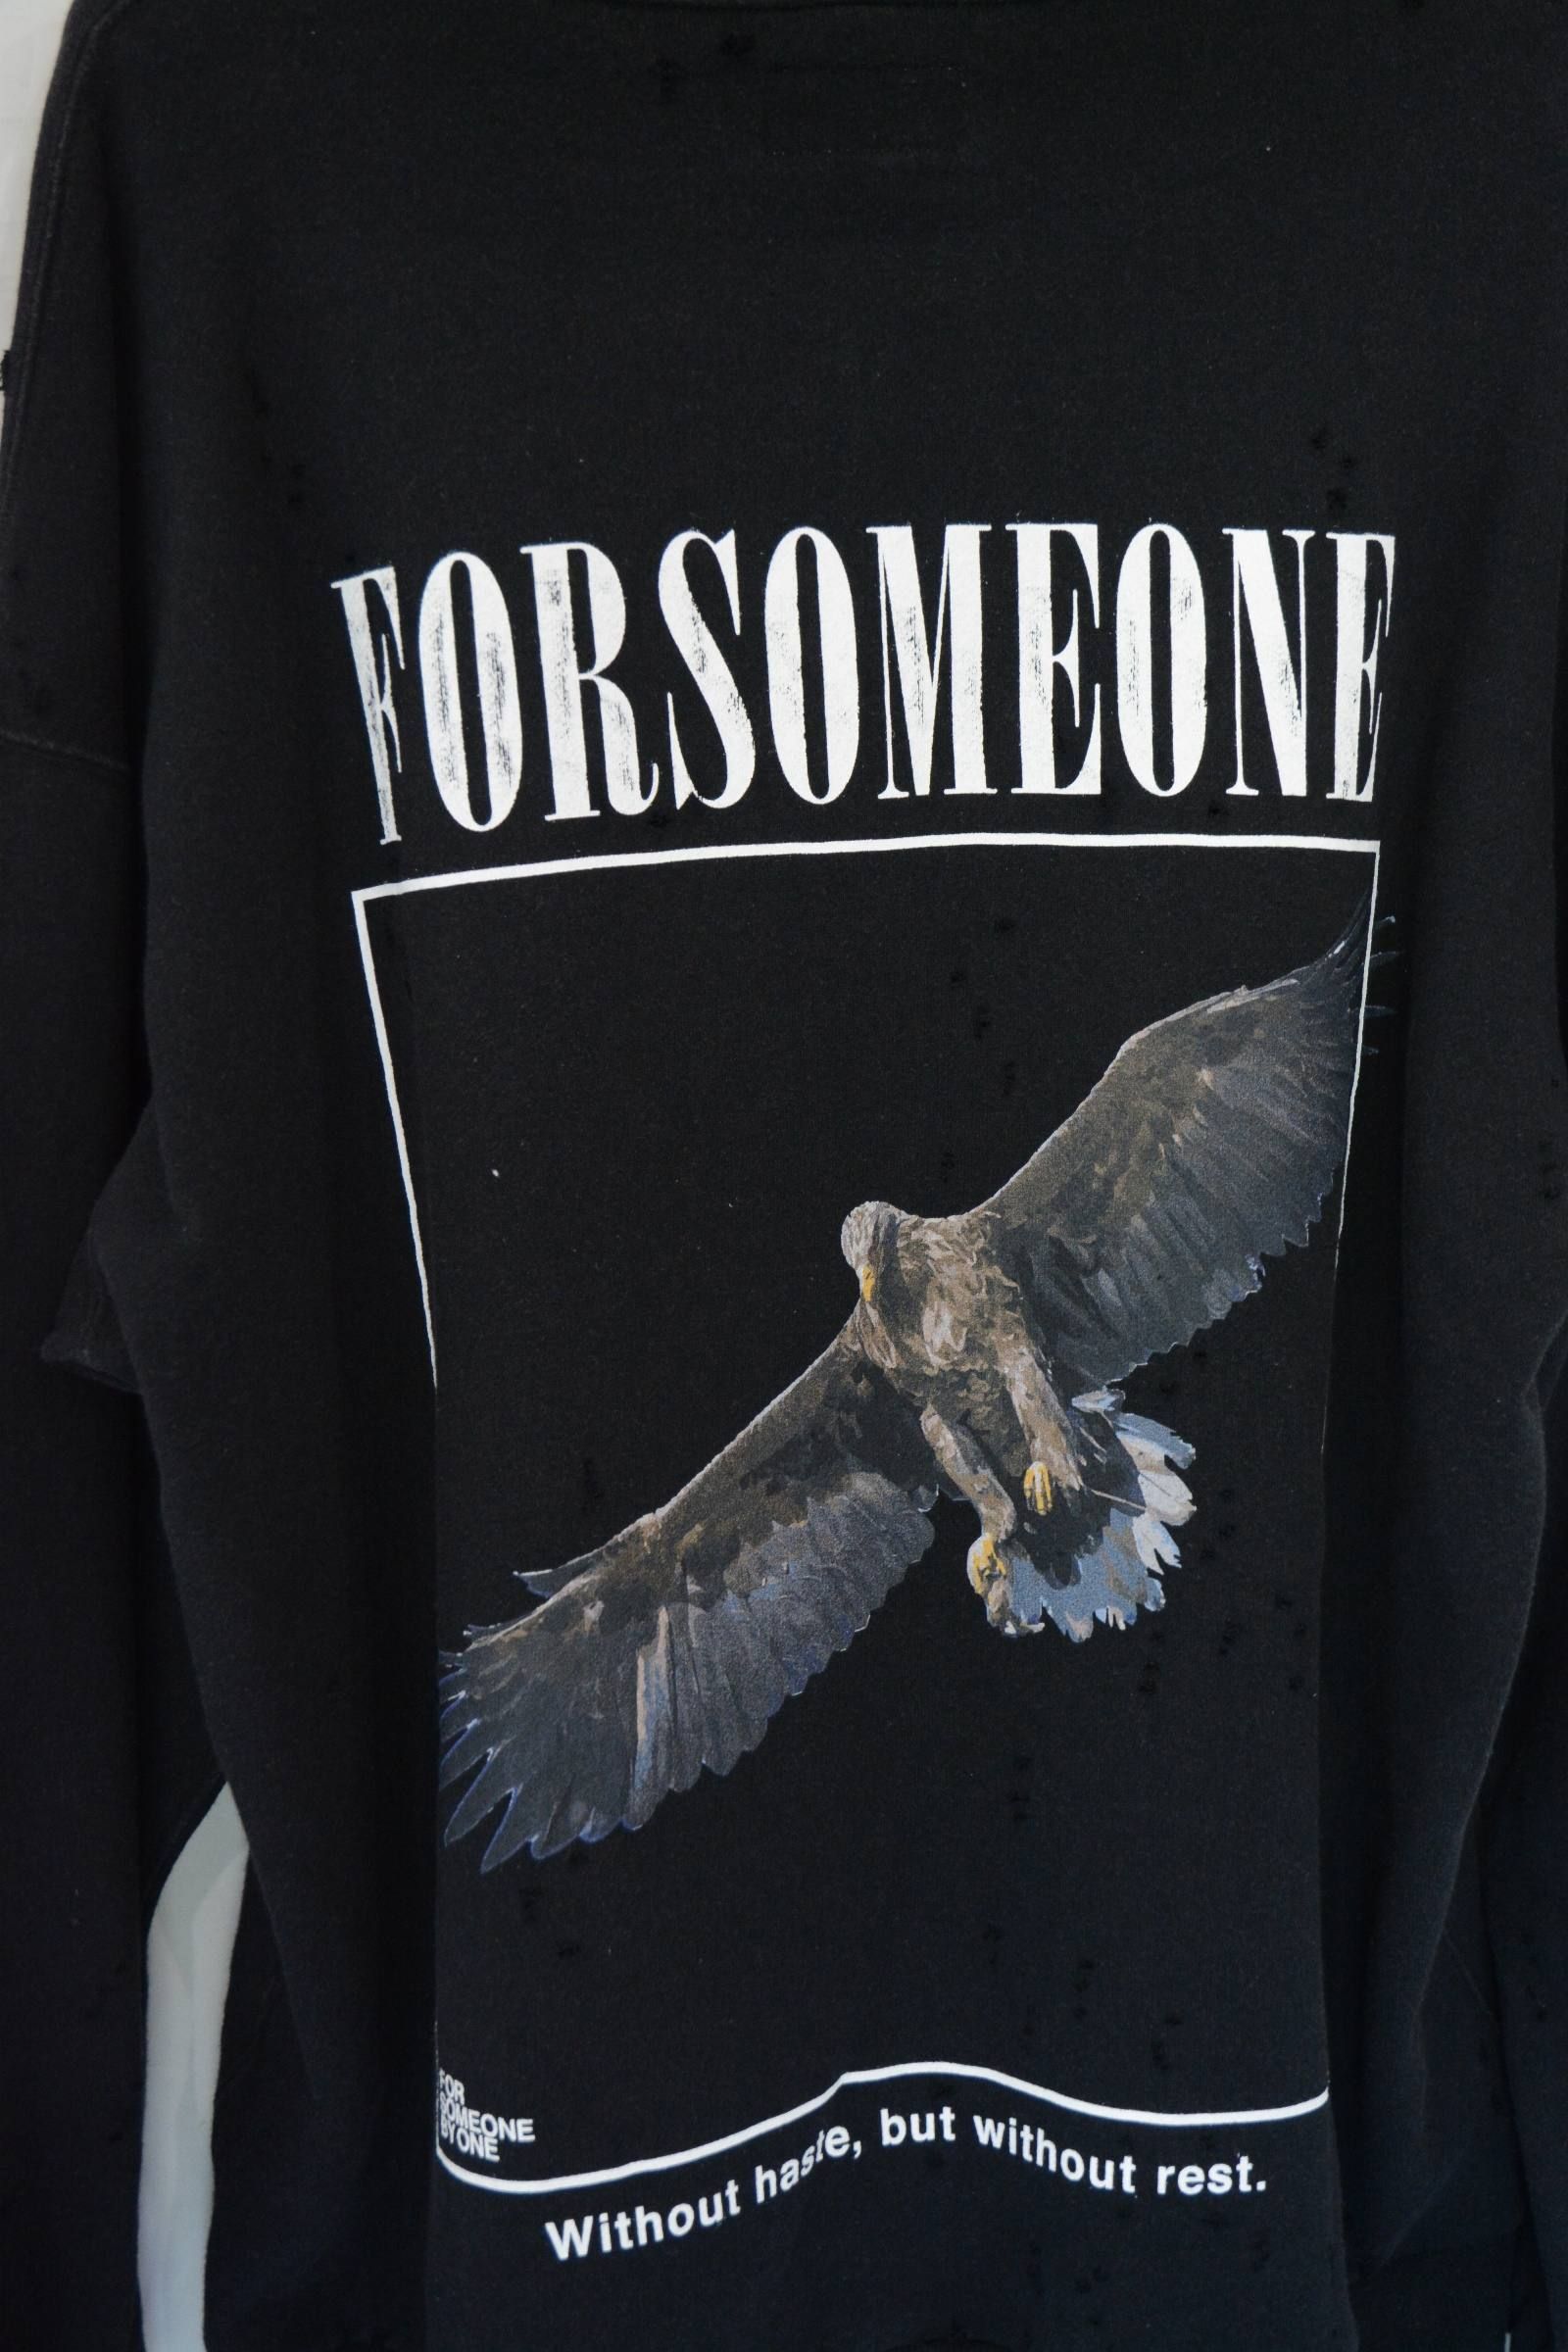 FORSOMEONE - ”DAMEGE EAGLE” HOODIE | chord online store